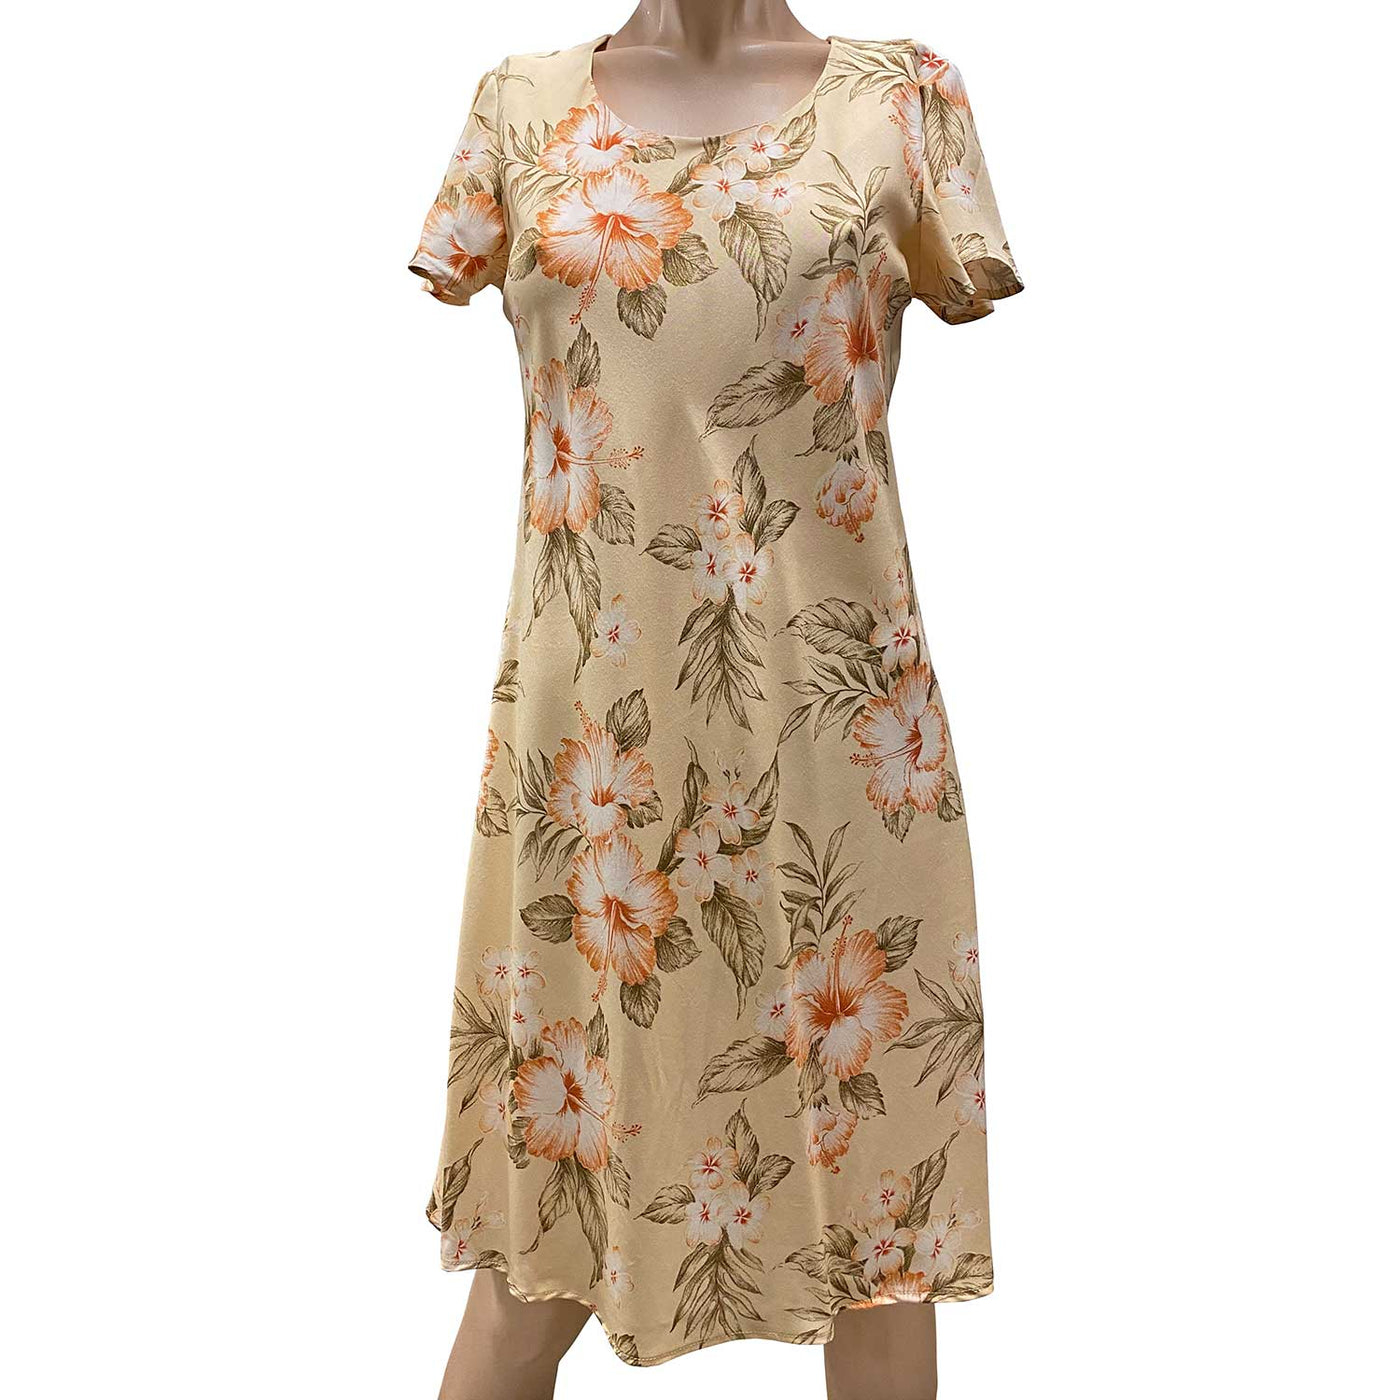 Hibiscus Resort Peach A-Line Dress with Cap Sleeves